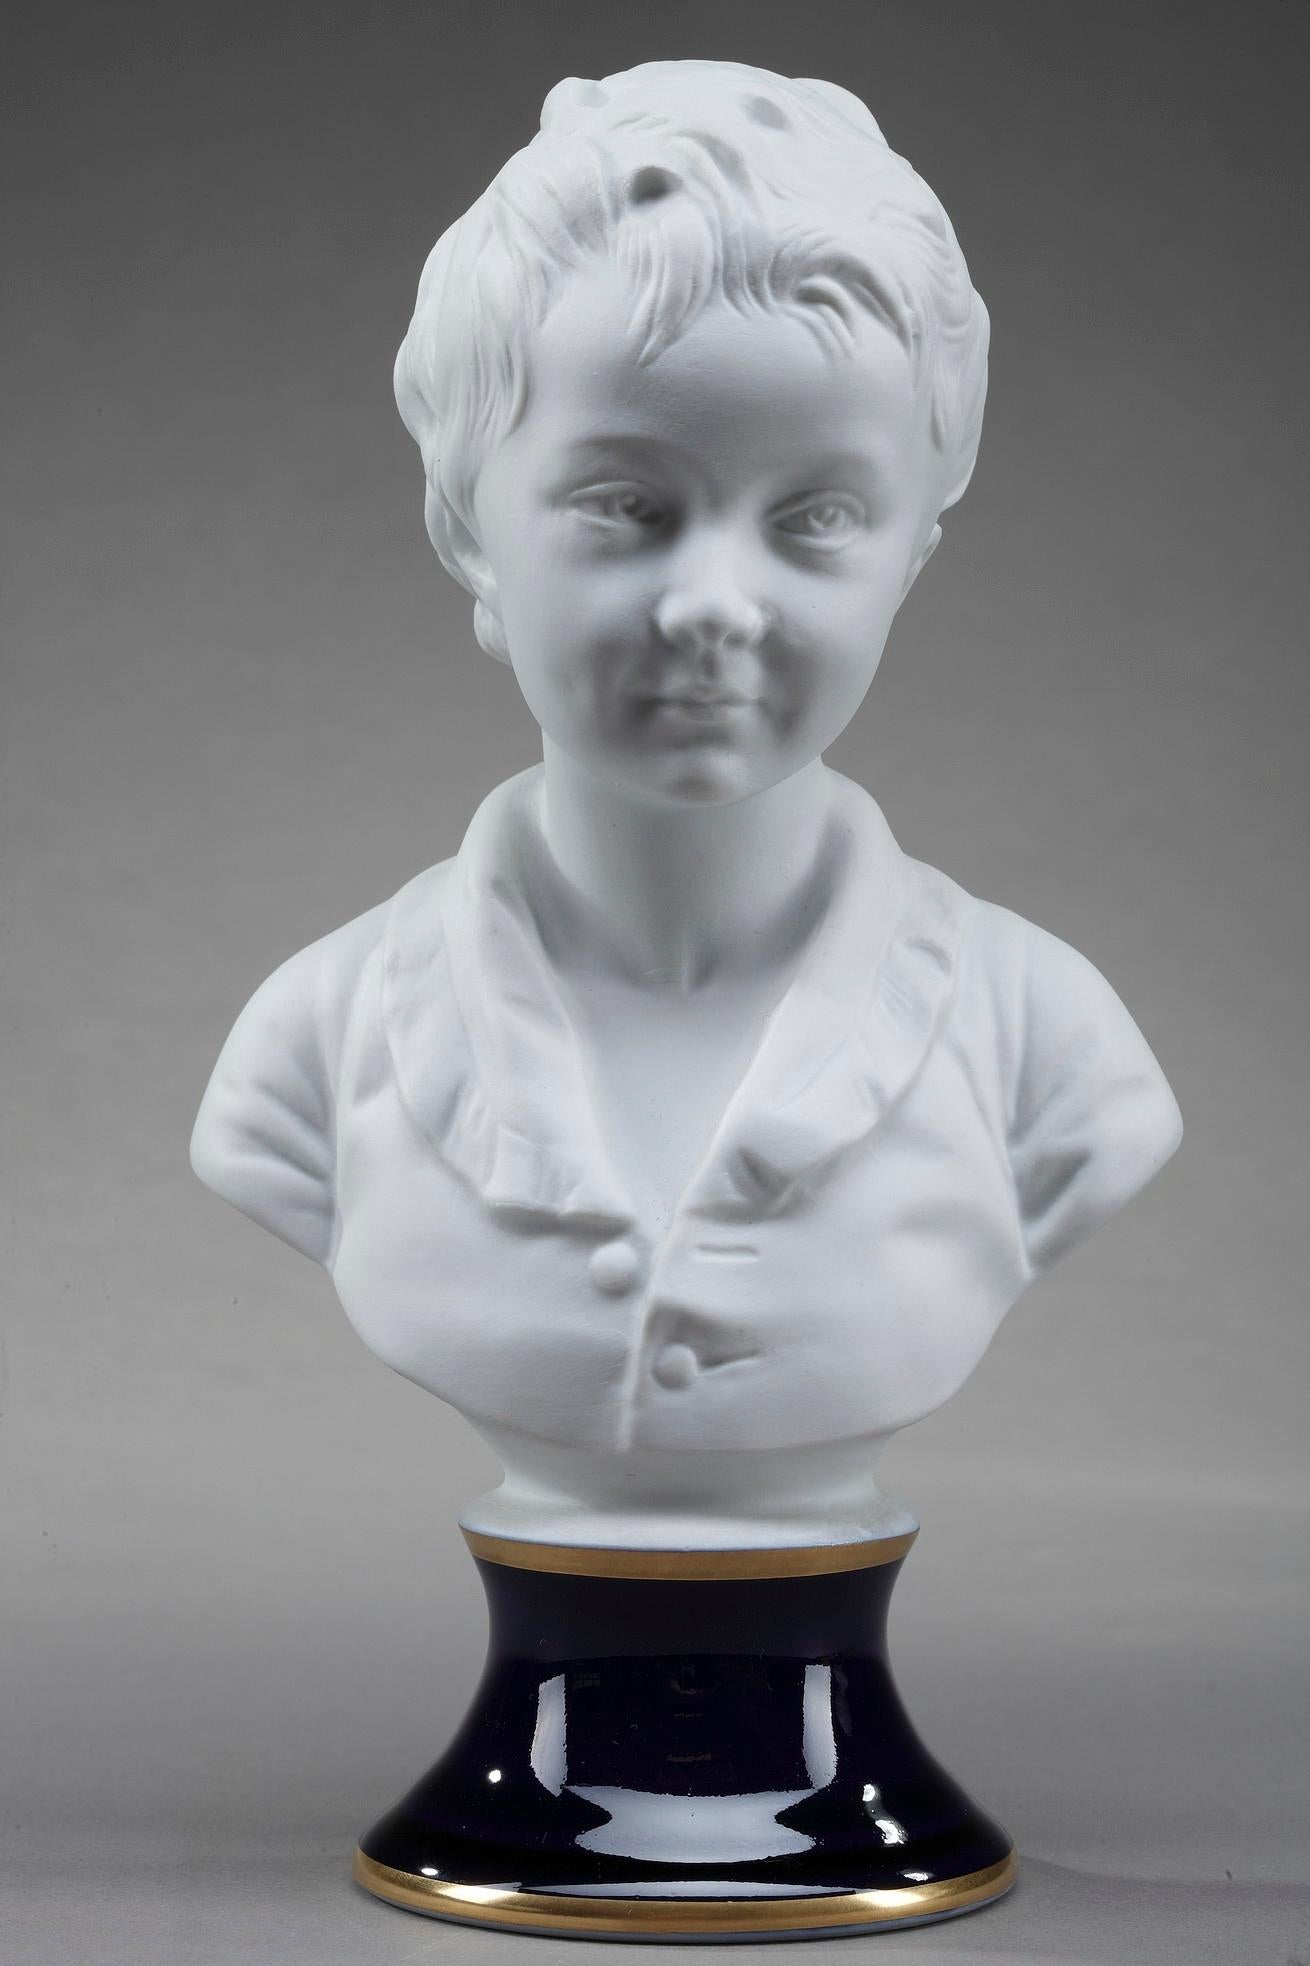 This pair of Limoges porcelain bisque busts featuring Brongniart children derives from a masterpiece of children's portraiture by Jean-Antoine Houdon (French, 1741-1828): the busts of Louise (1772-1845) and her brother Alexandre (1770-1847),